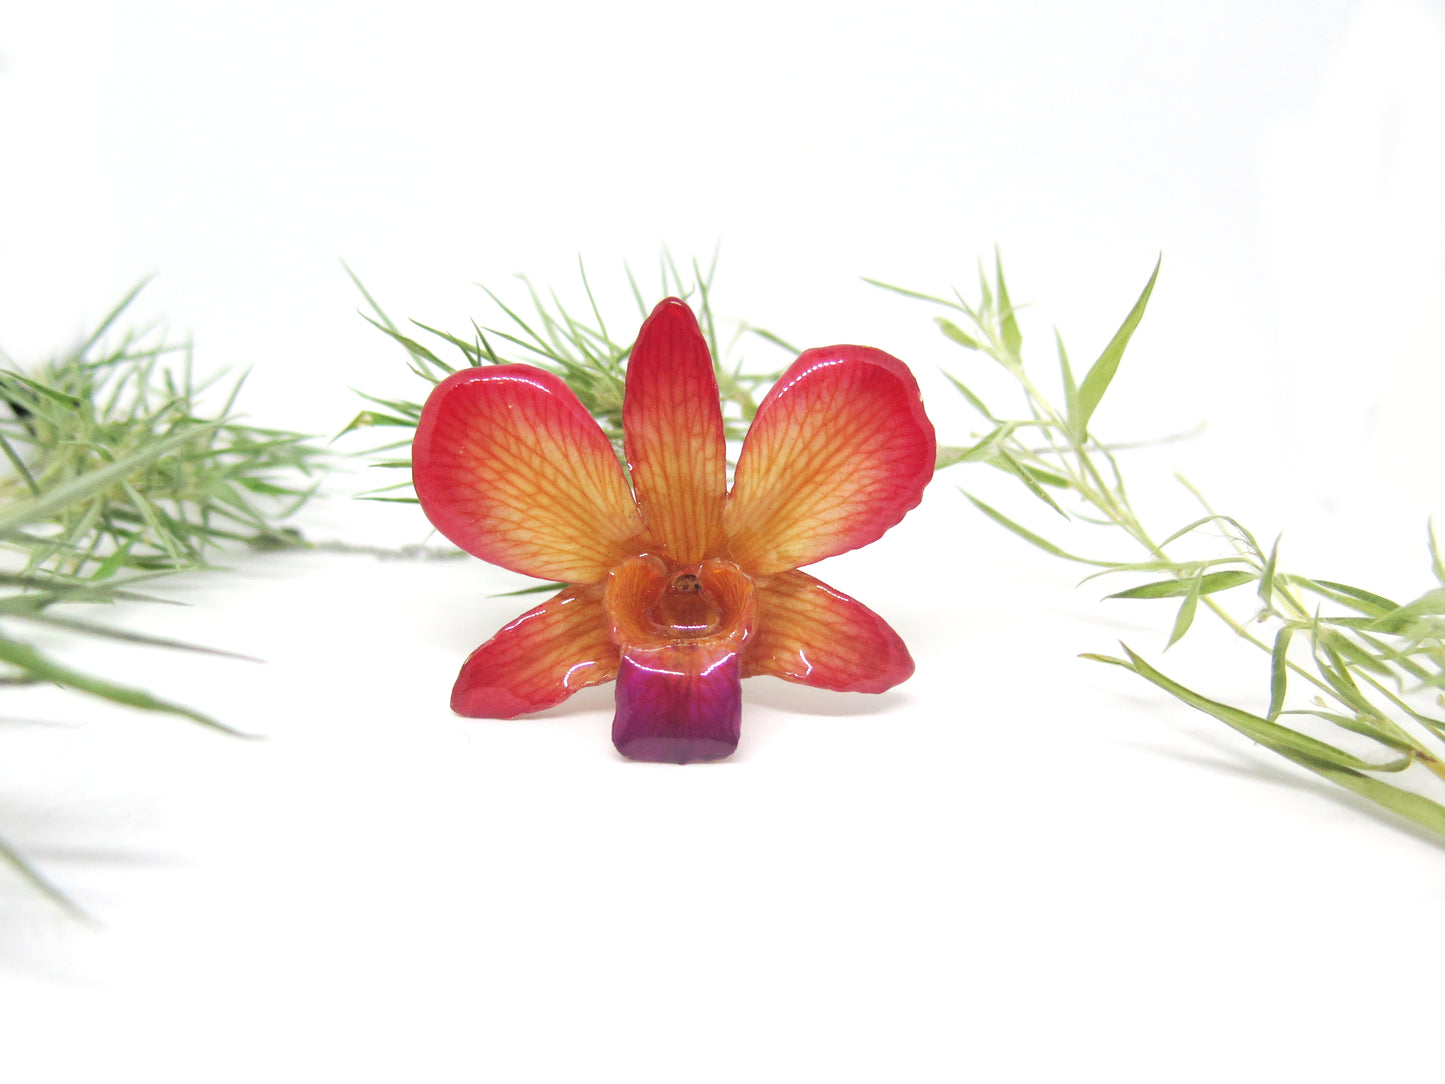 Real Orchid flower necklace Flower Jewelry in Resin Red Yellow